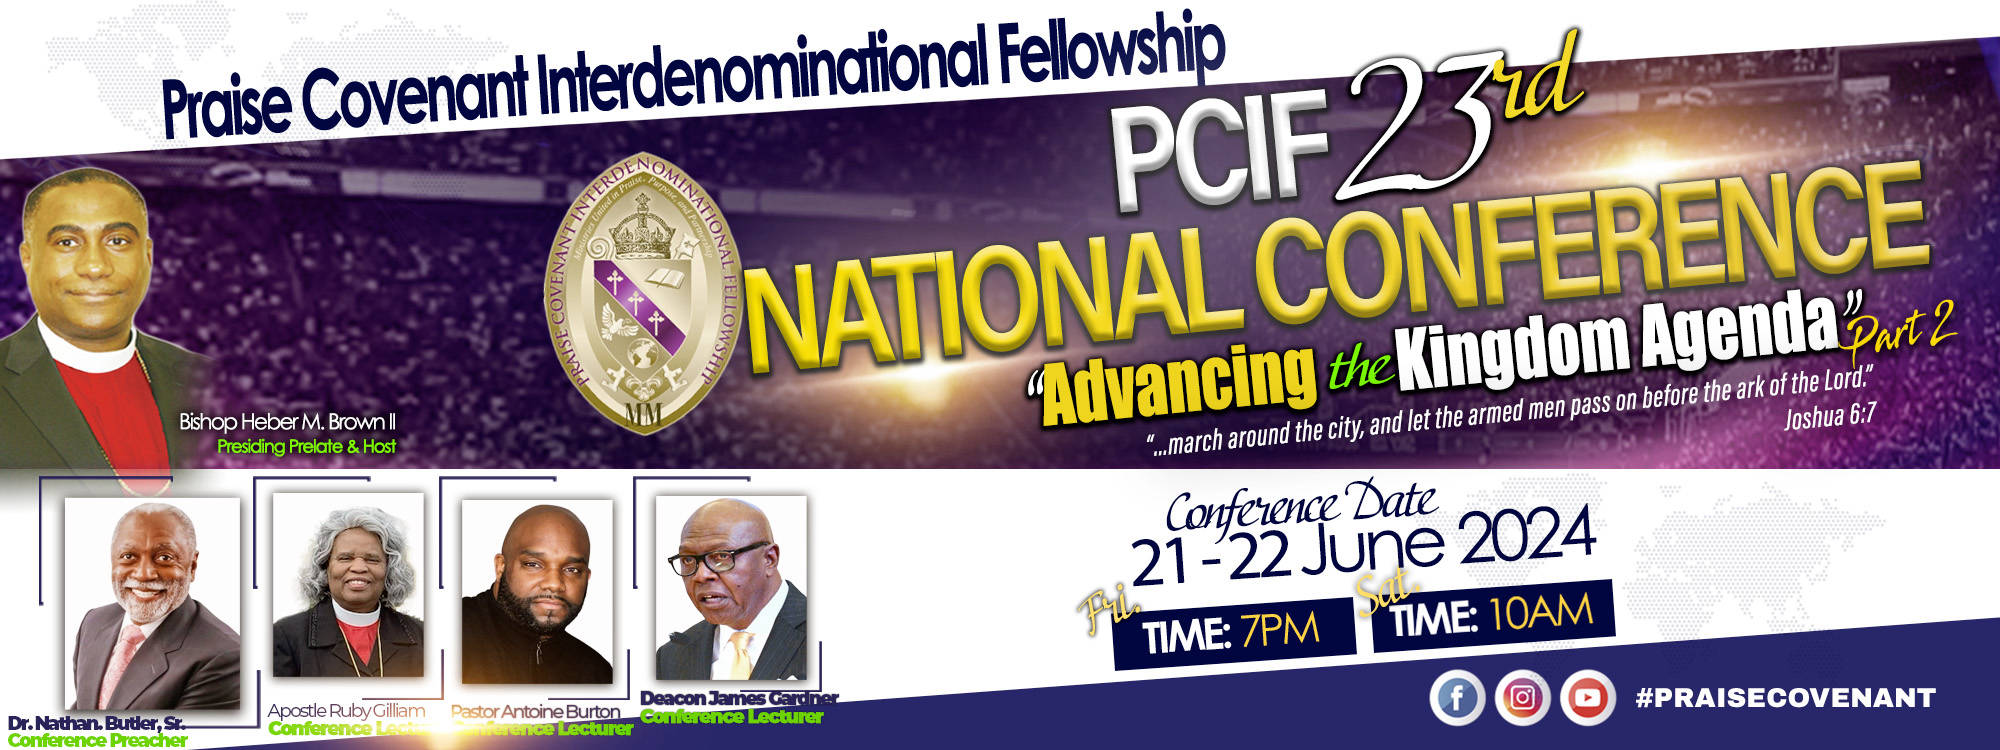 23 NATIONAL CONFERENCE